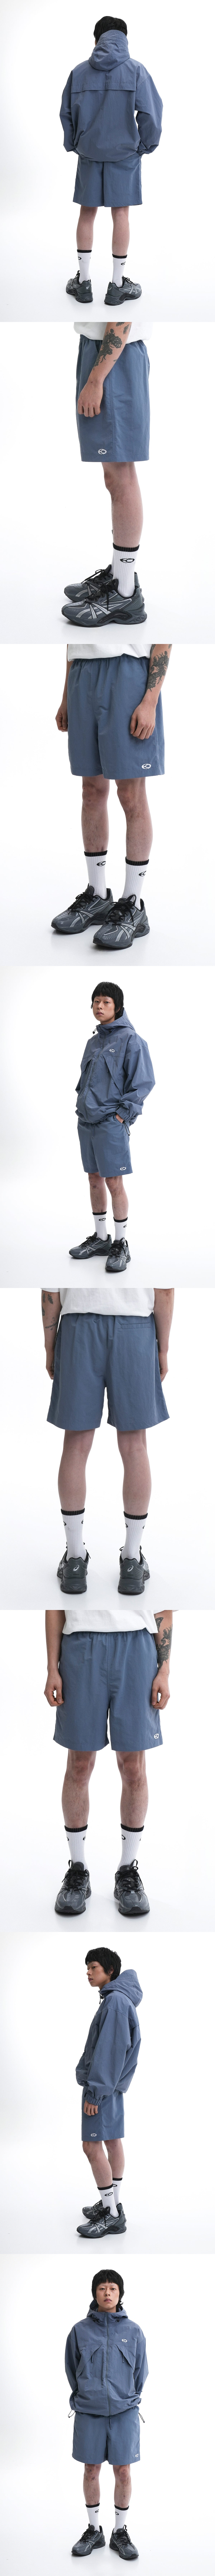 Mens European Retro Street Classic Nylon Half Pants With Embroidered Label  Sleeves, Oversized Nylon Pocket, And Custom Fabric Comfortable And  Breathable LKQS From Topndkozum626, $35.32 | DHgate.Com